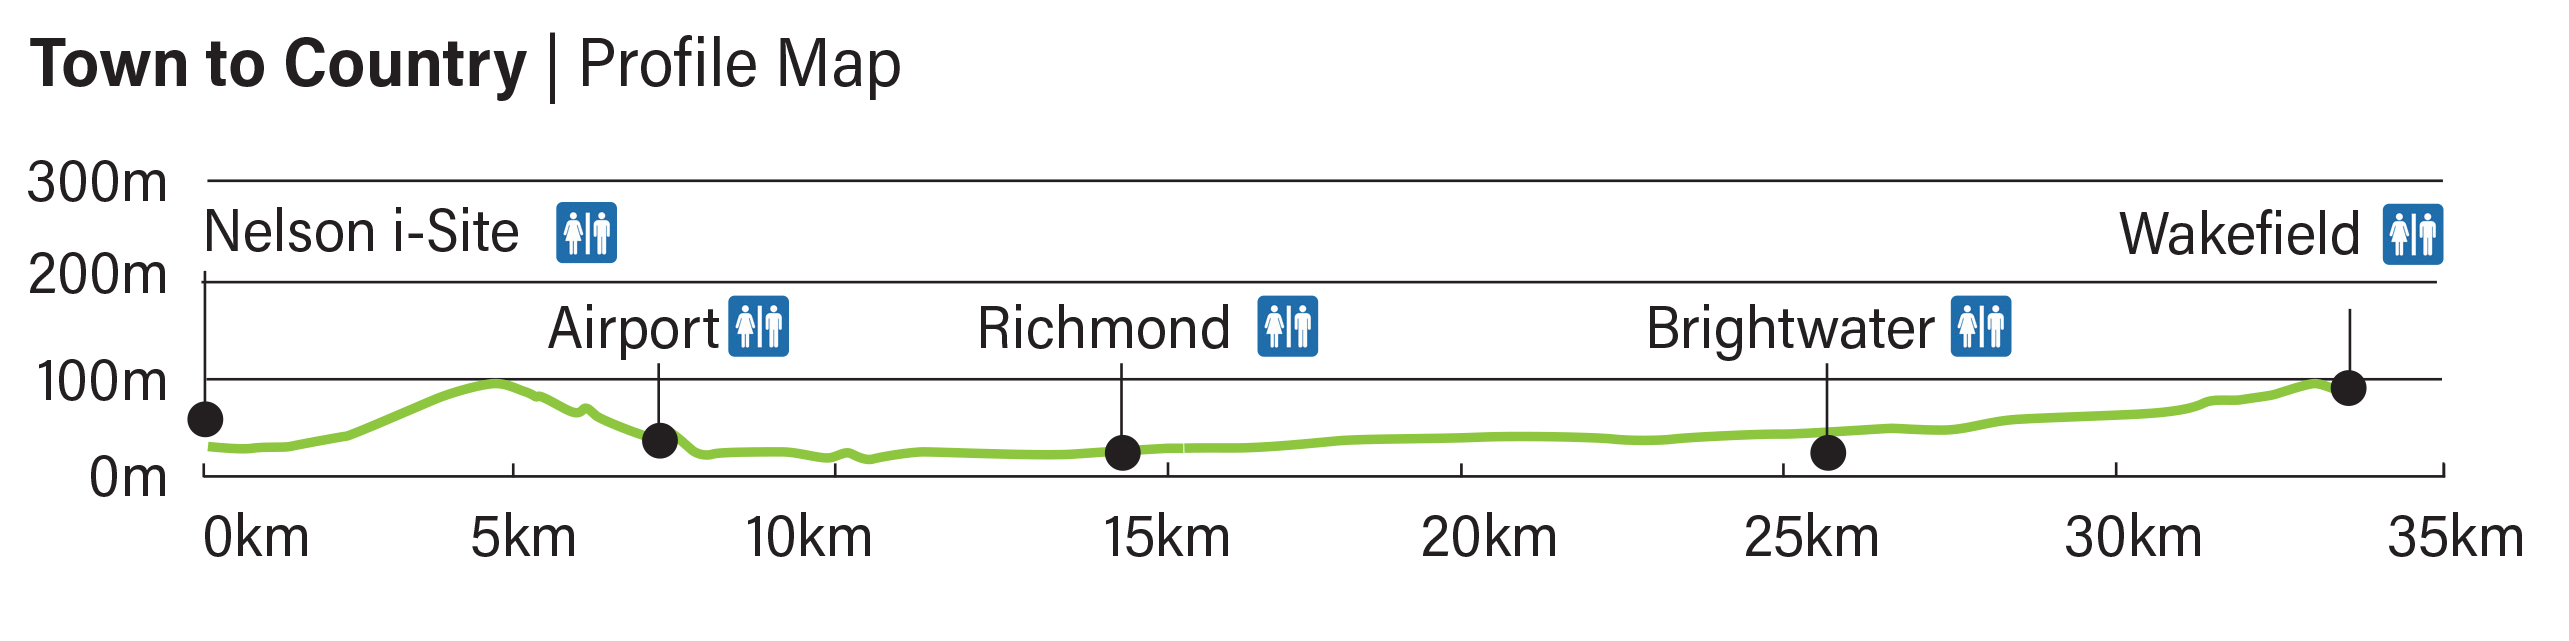 Town to Country: Nelson CBD | Airport | Richmond | Brightwater | Wakefield Profile Map